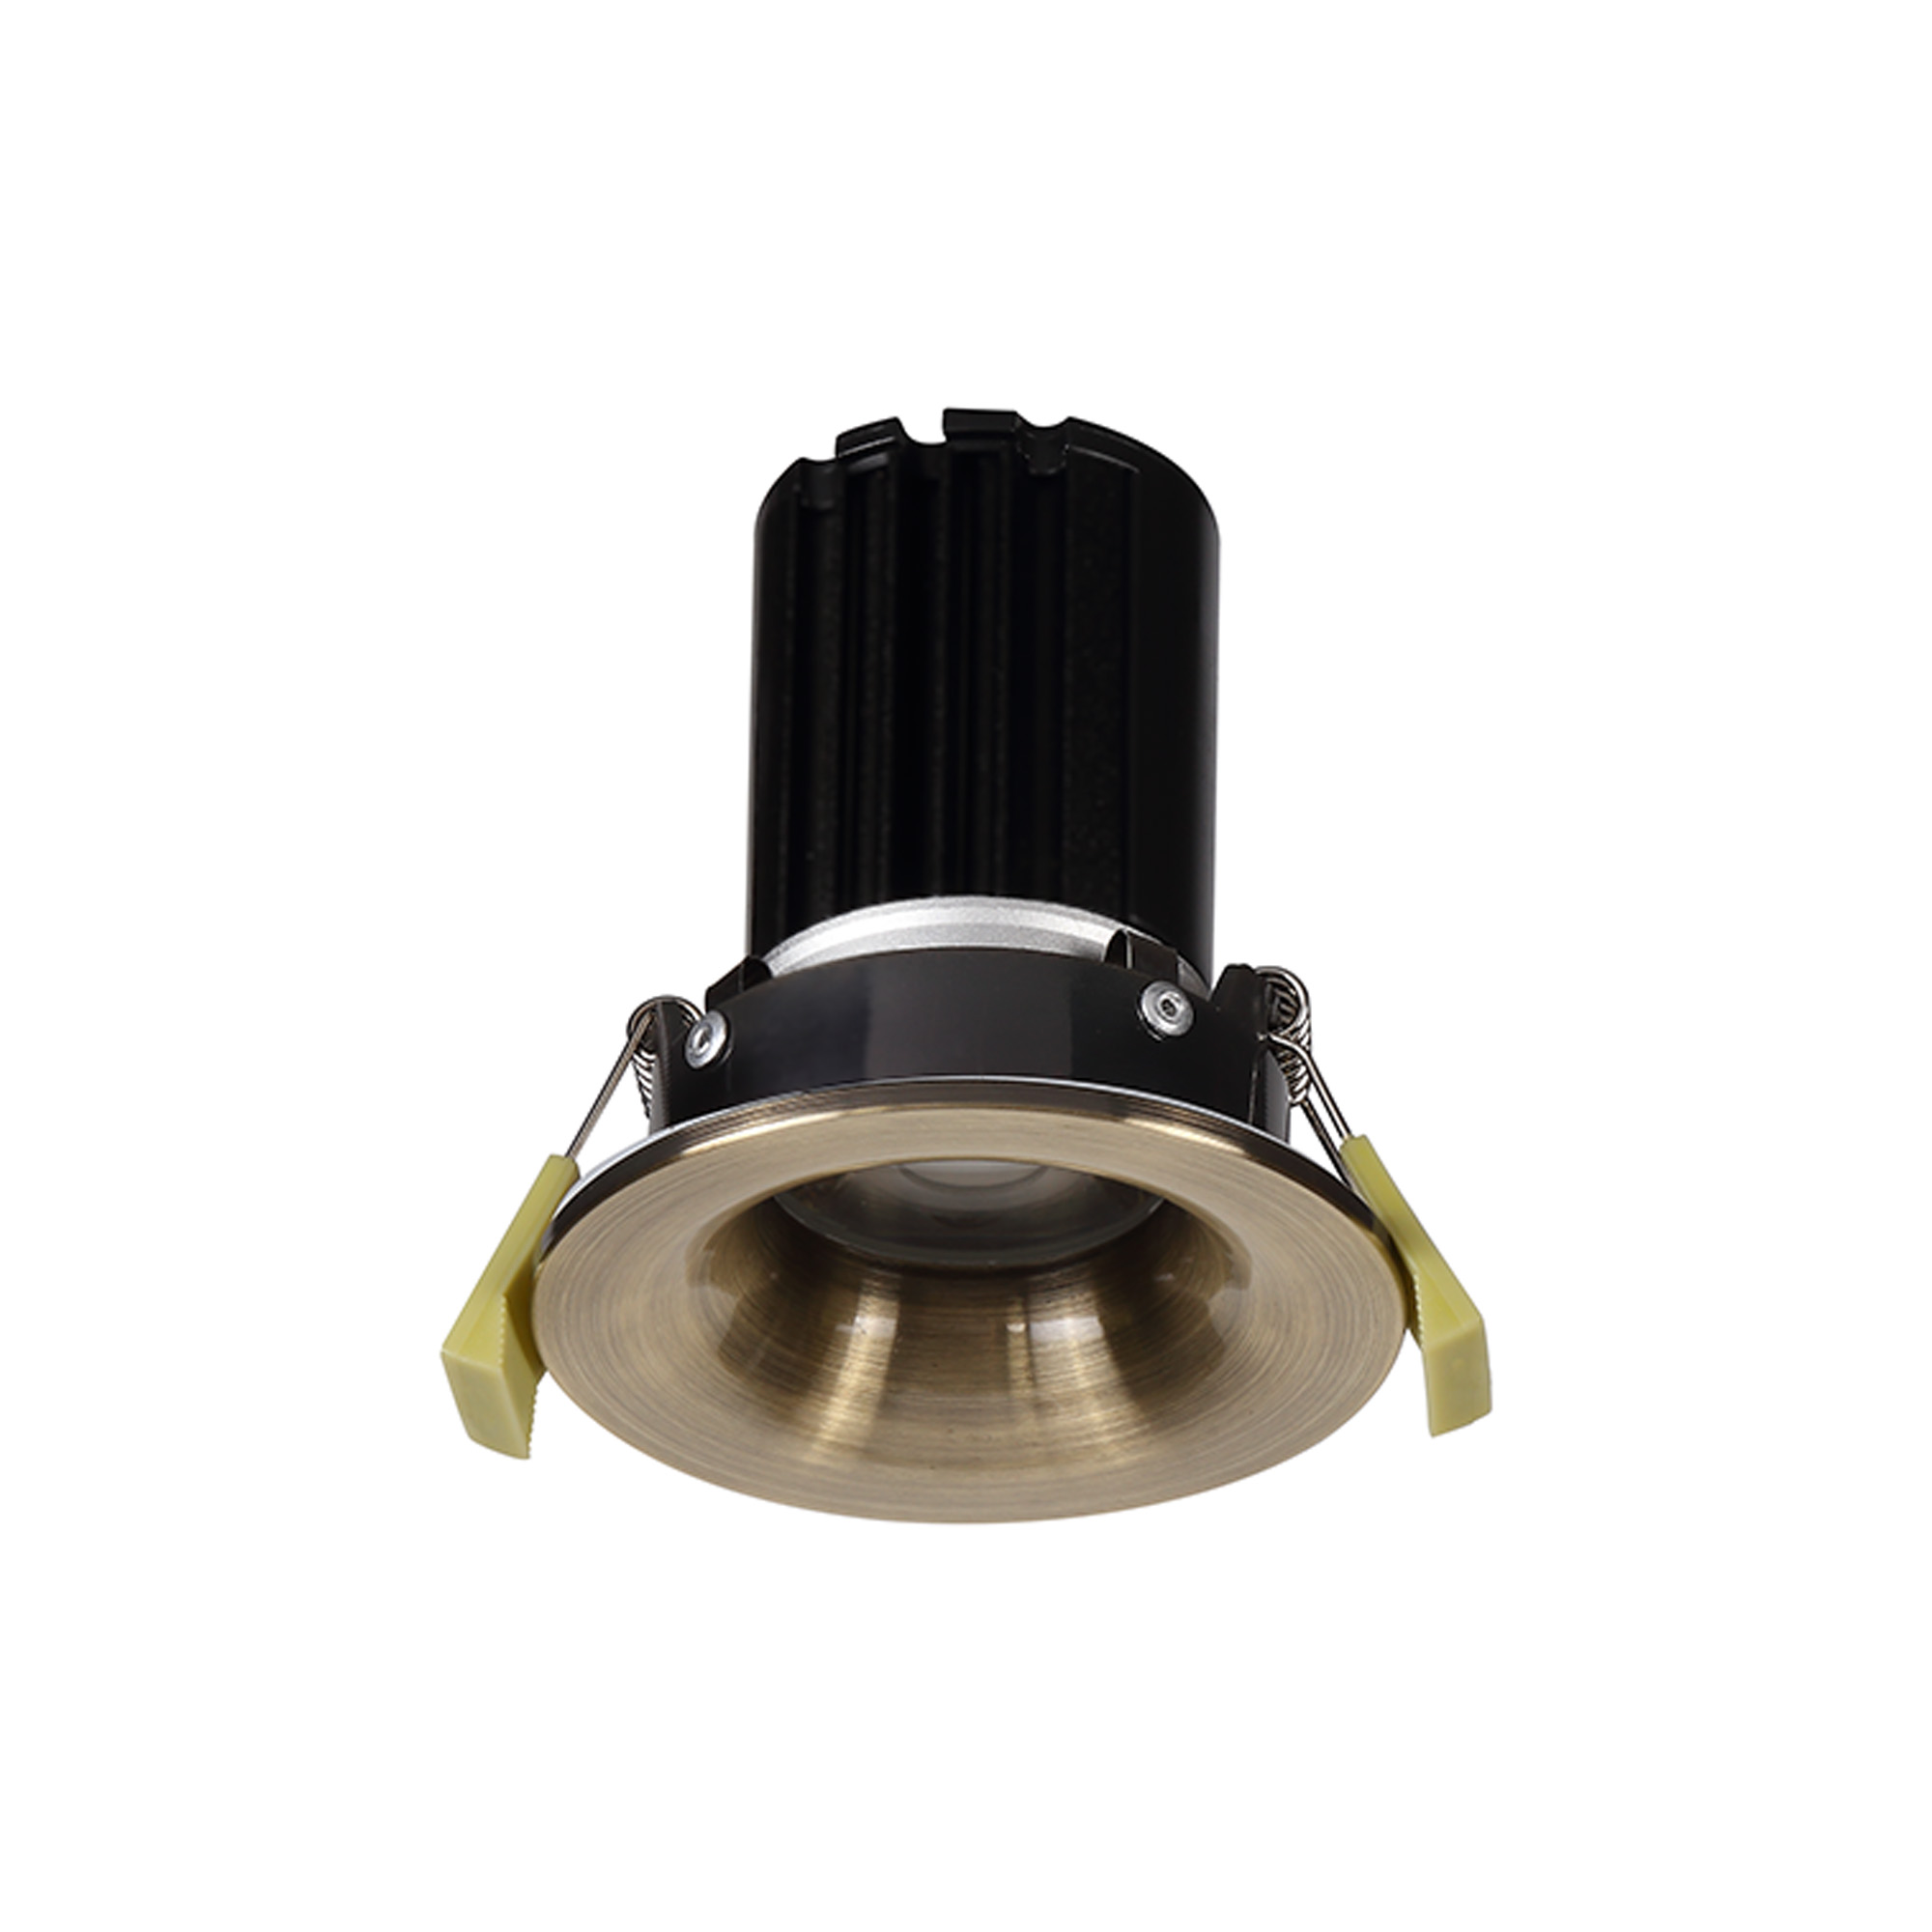 DM201554  Bruve 12 Tridonic powered 12W 2700K 1200lm 12° LED Engine,350mA , CRI>90 LED Engine Antique Brass Fixed Round Recessed Downlight, Inner Glass cover, IP65